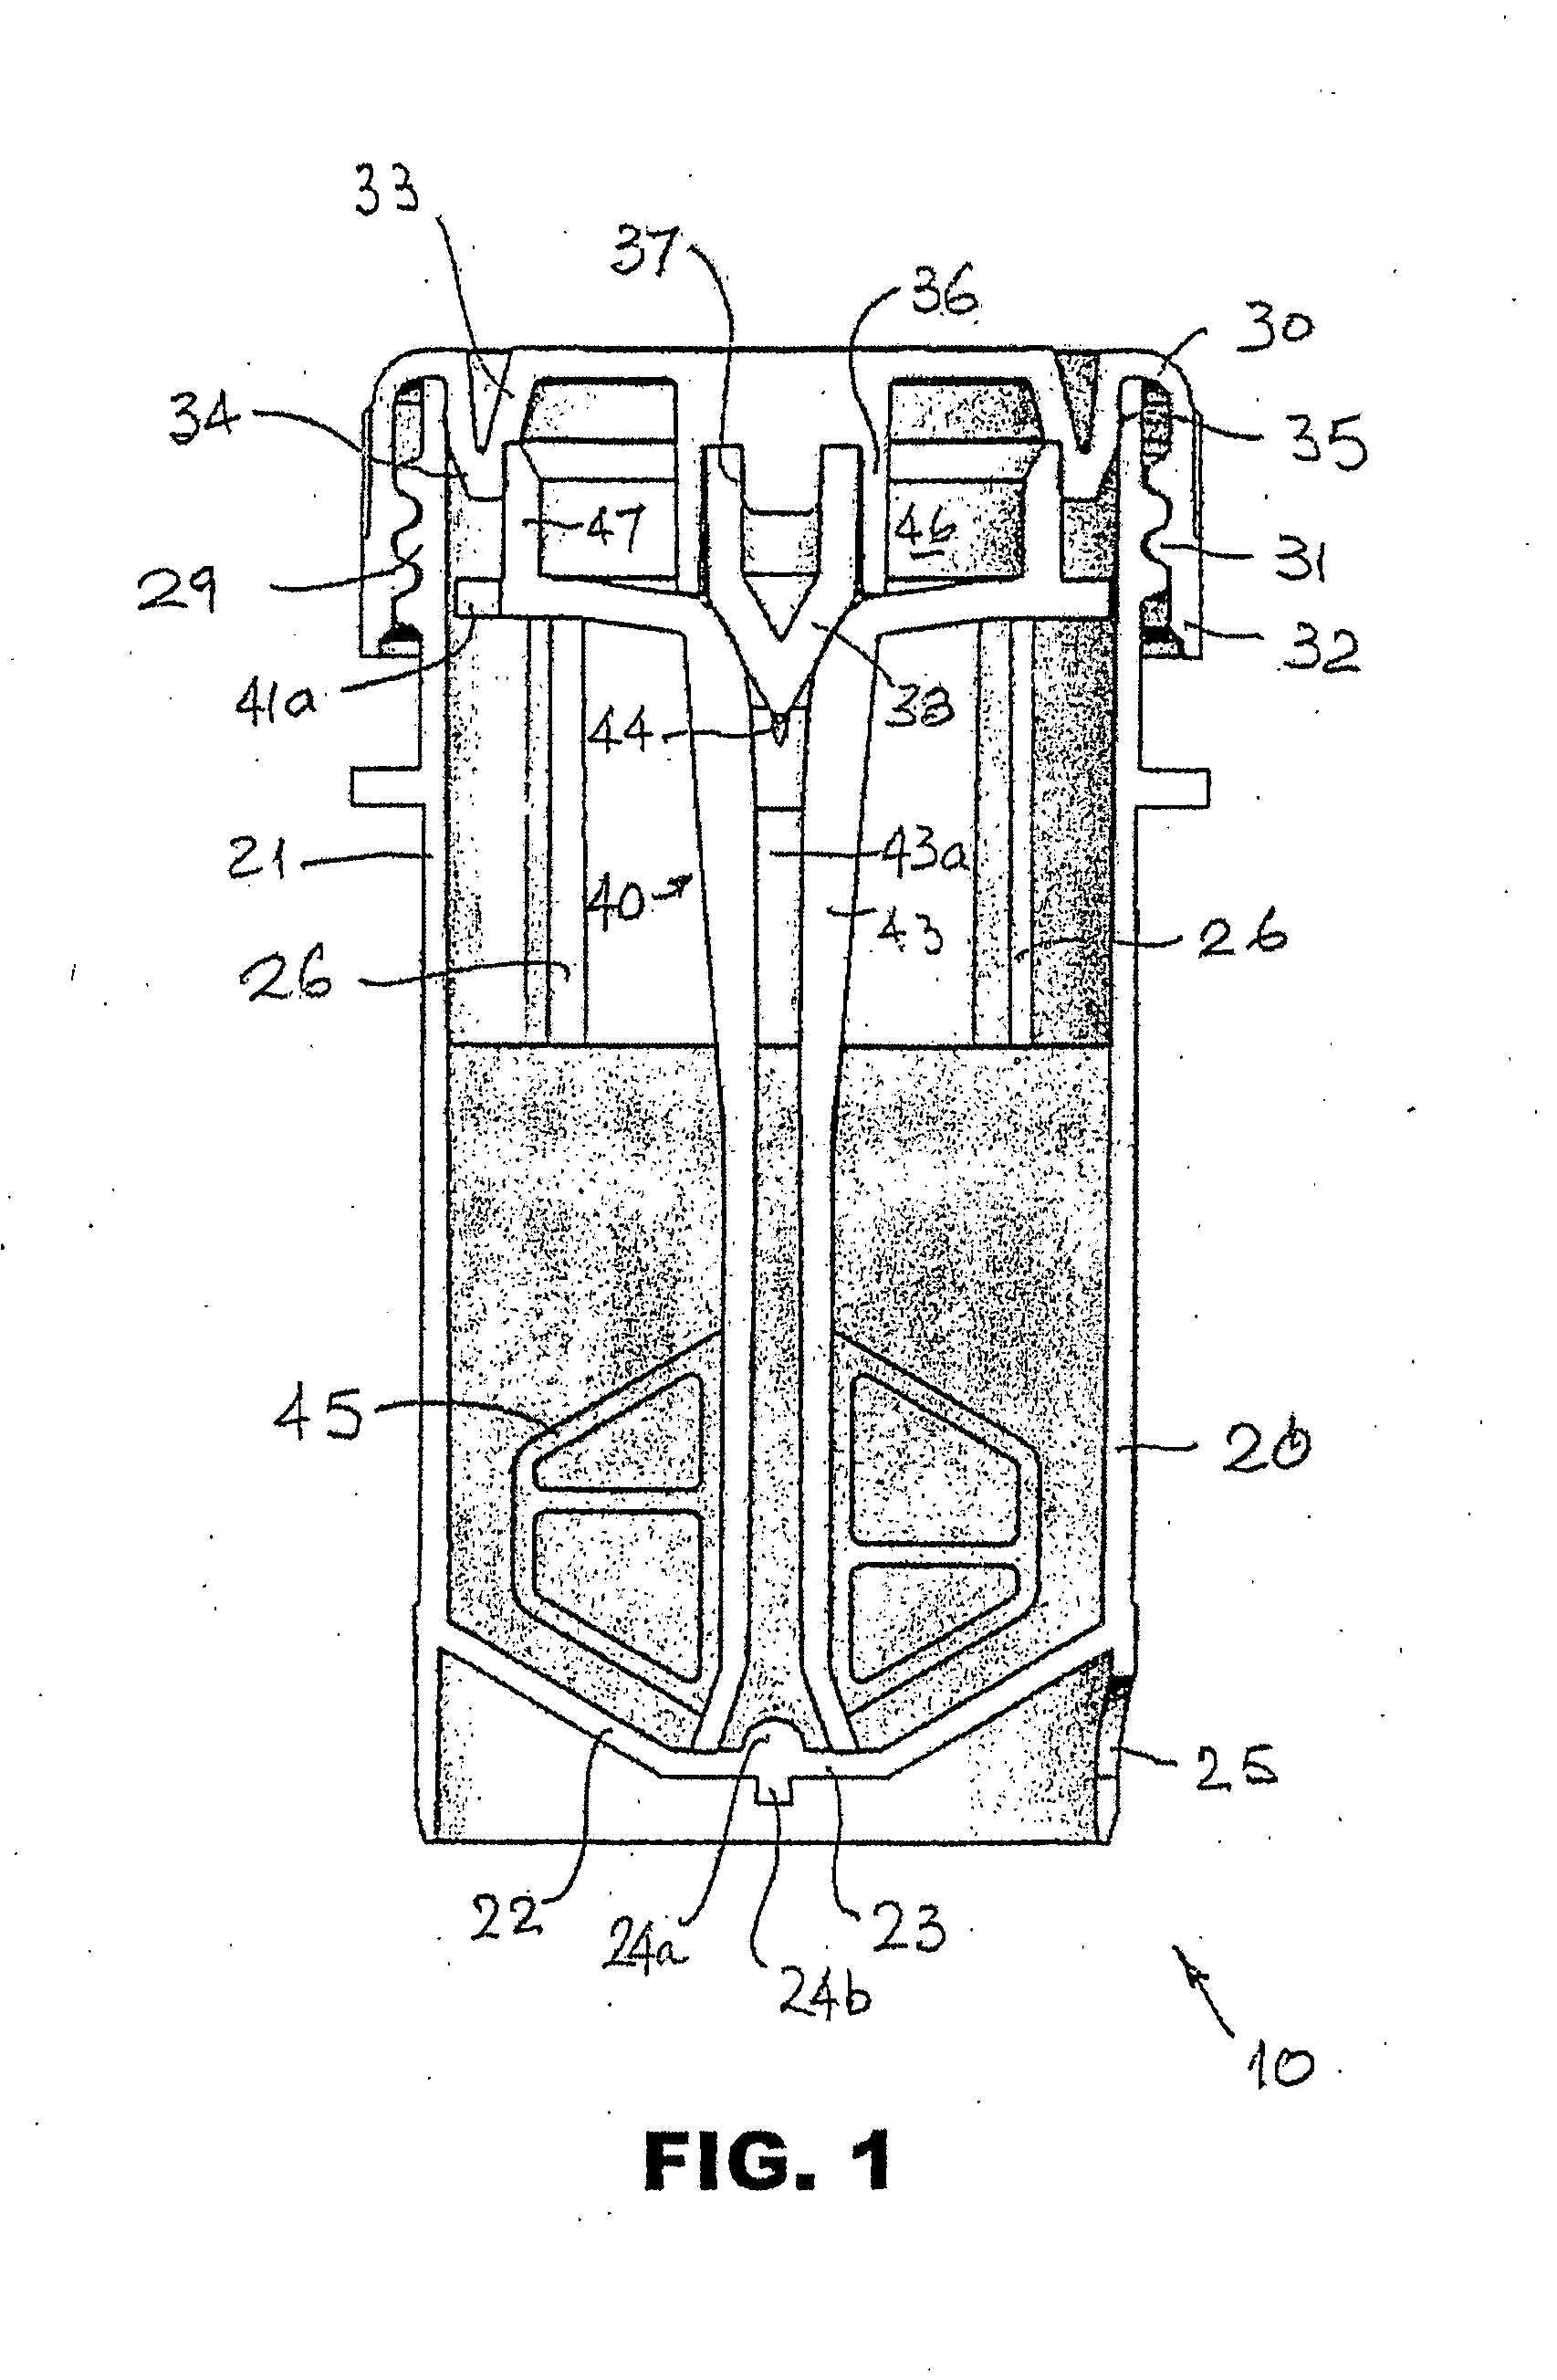 Vial Assembly, Sampling Apparatus And Method For Processing Liquid-Based Specimens